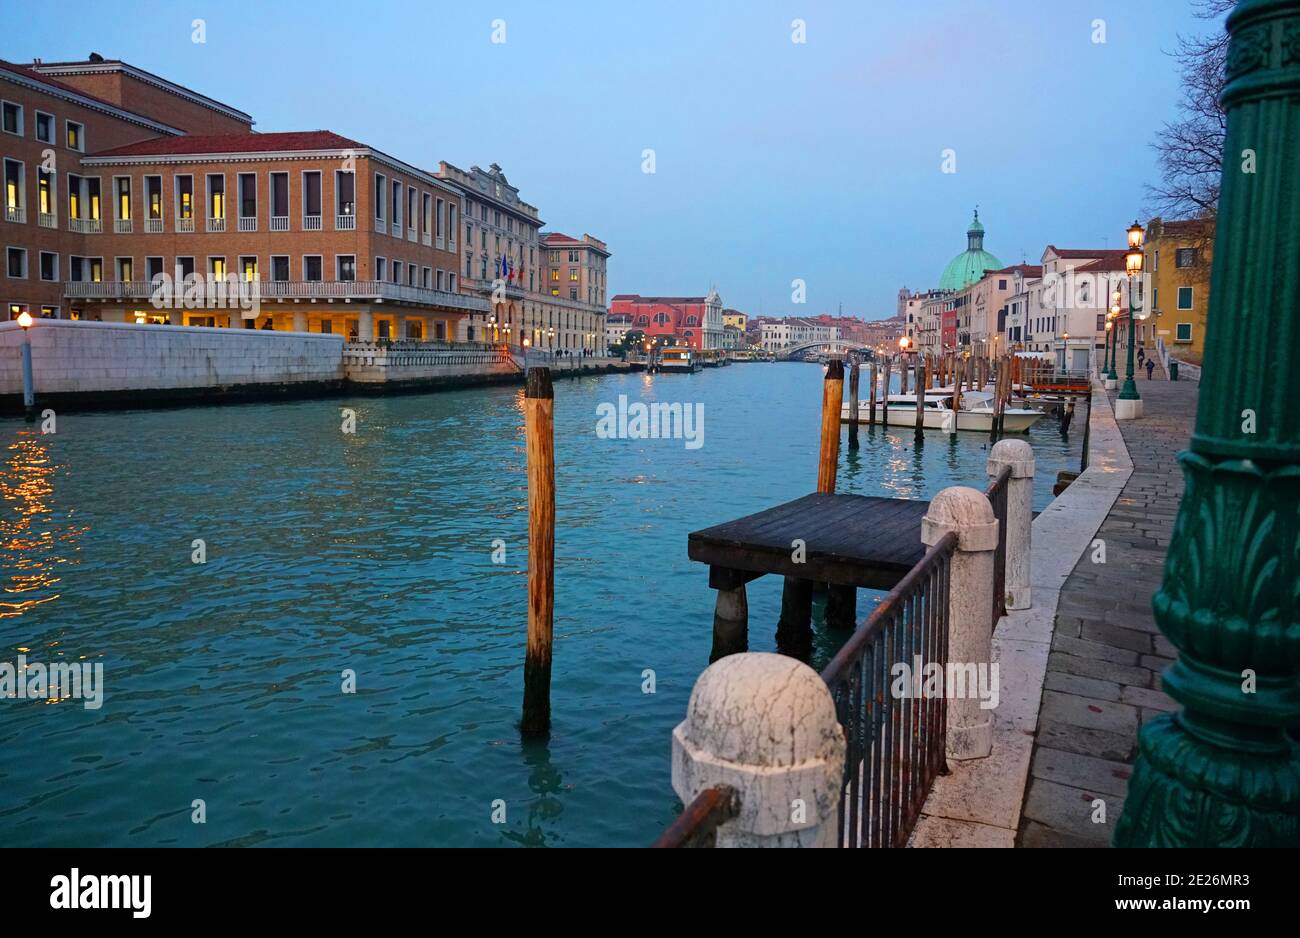 The Grand Canal in Venice, Italy Stock Photo